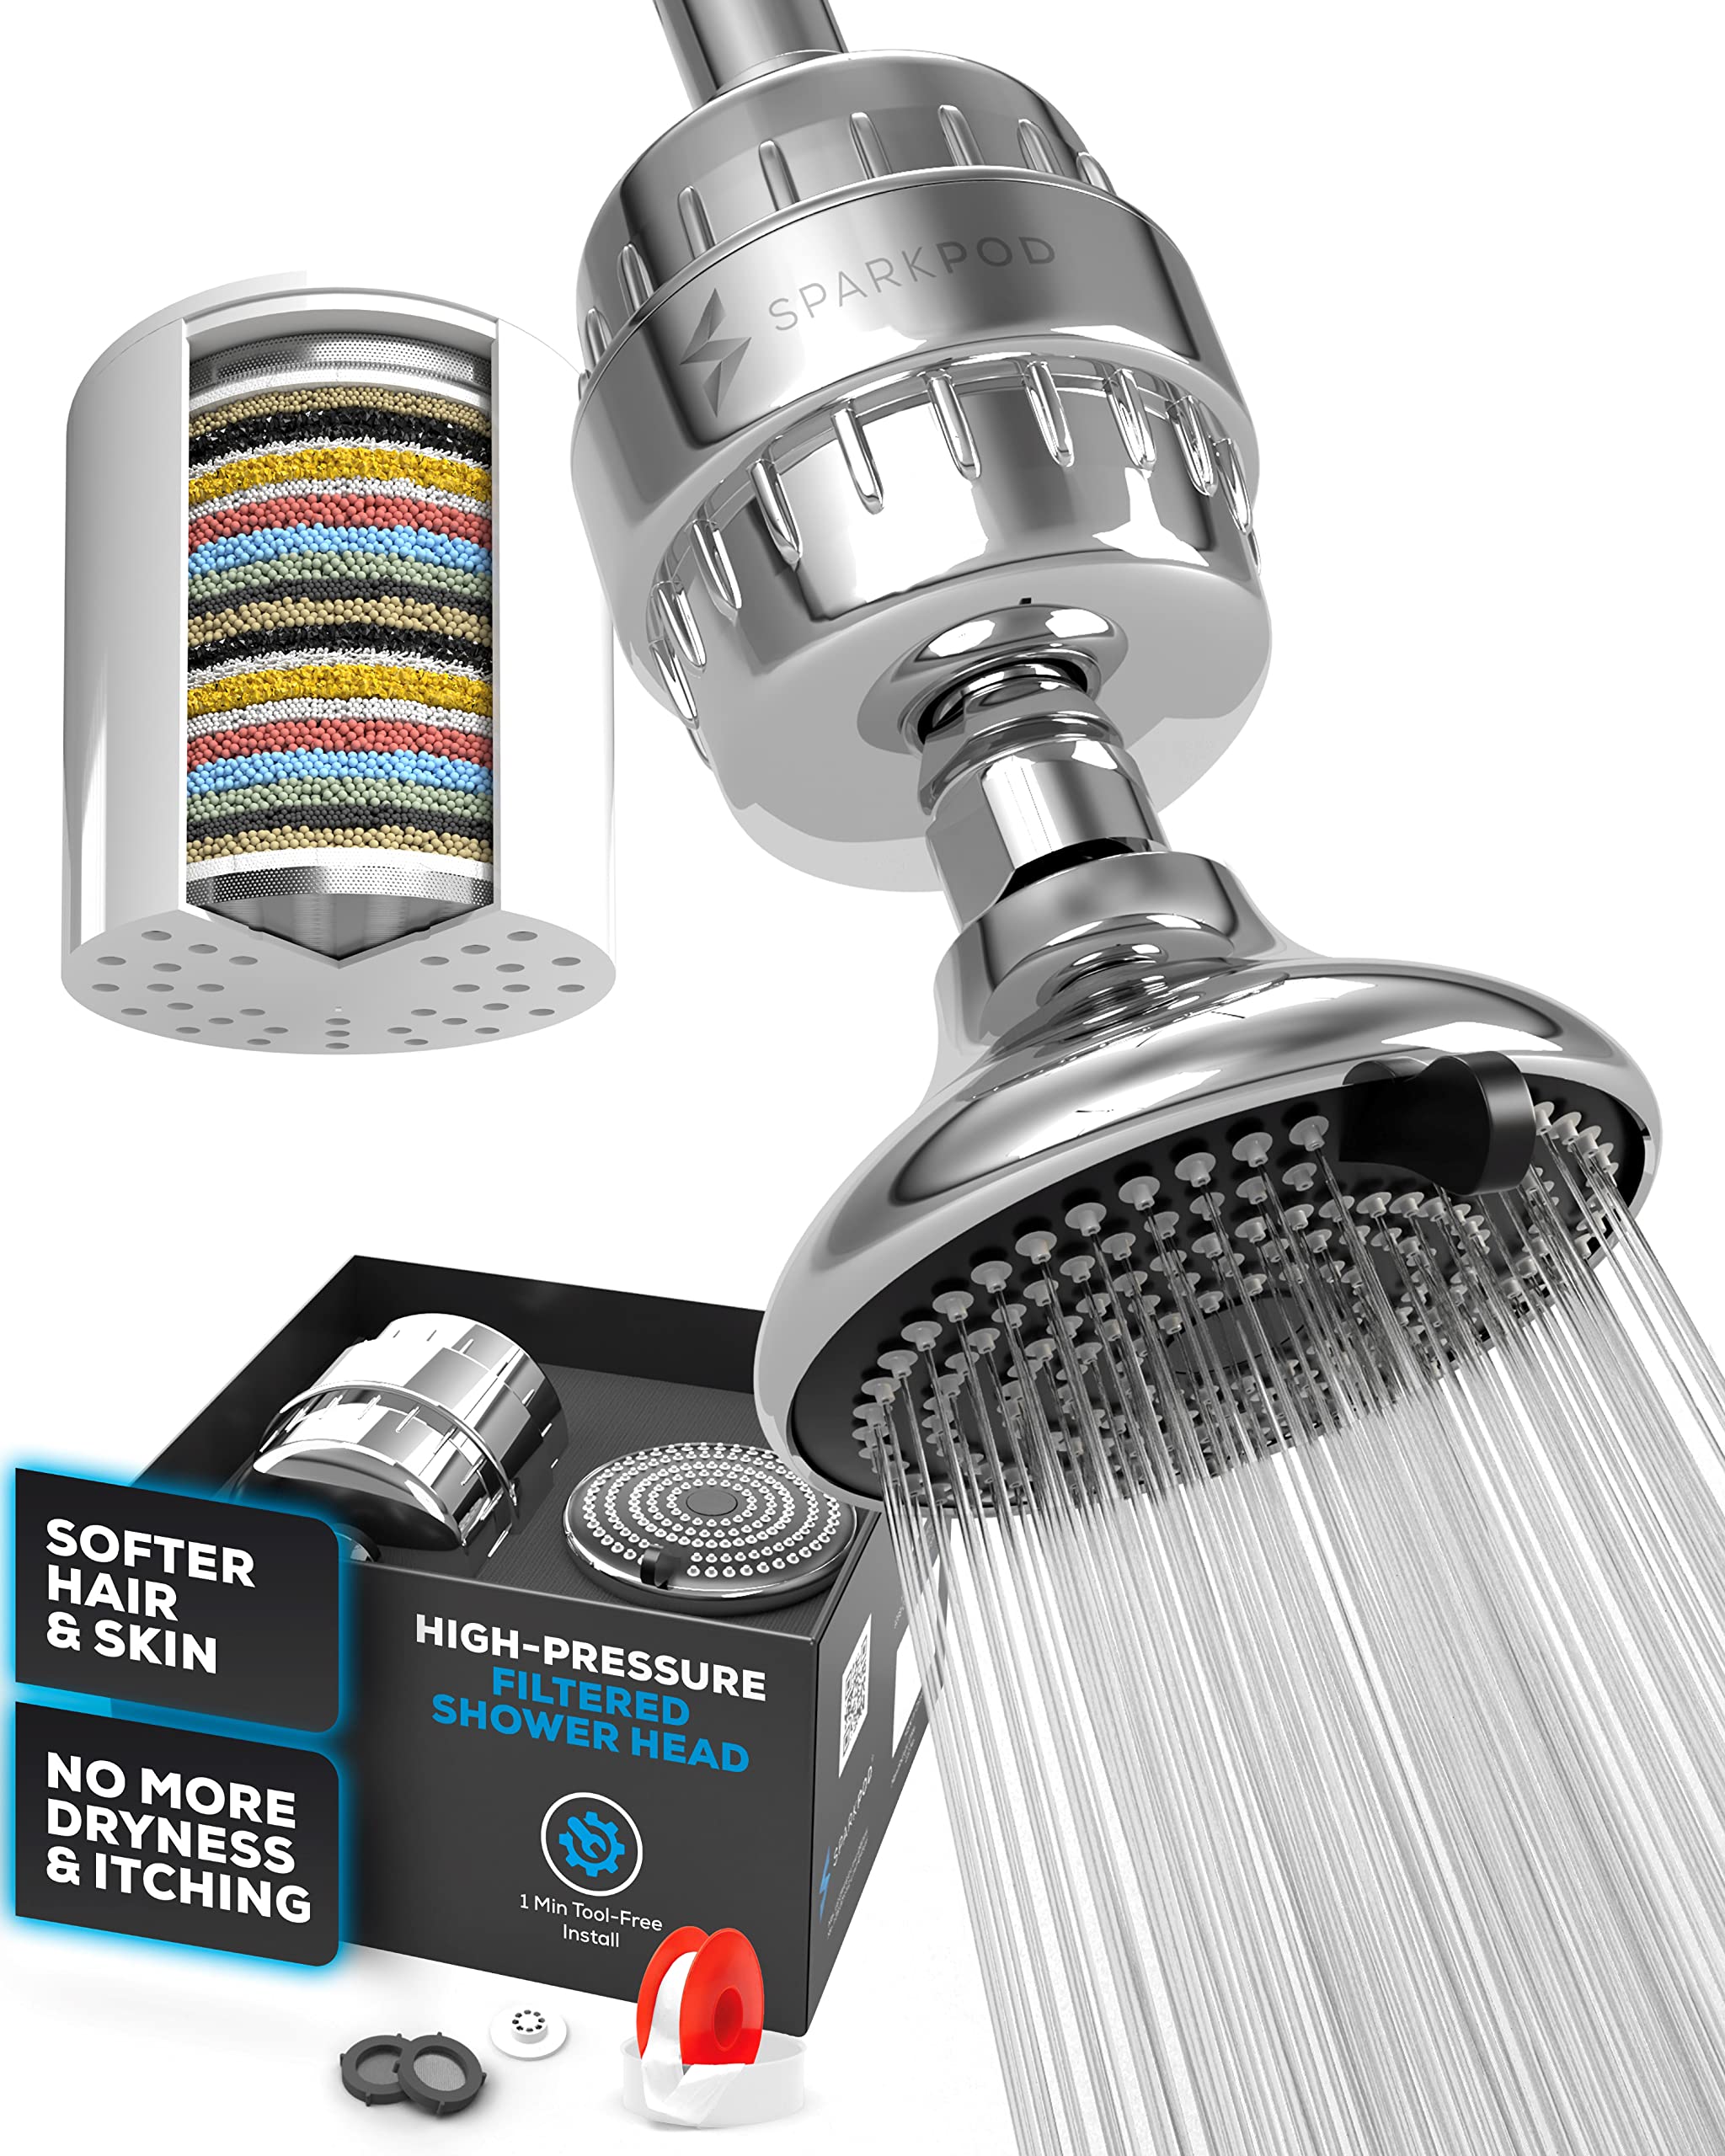 SparkPod Luxury Filtered Shower Head Set 23 Stage Shower Filter - Removes Chlorine and Heavy Metals - 3 Spray Settings Shower Head Filter for Hard Water - Showerhead with Filter (Polished Chrome)